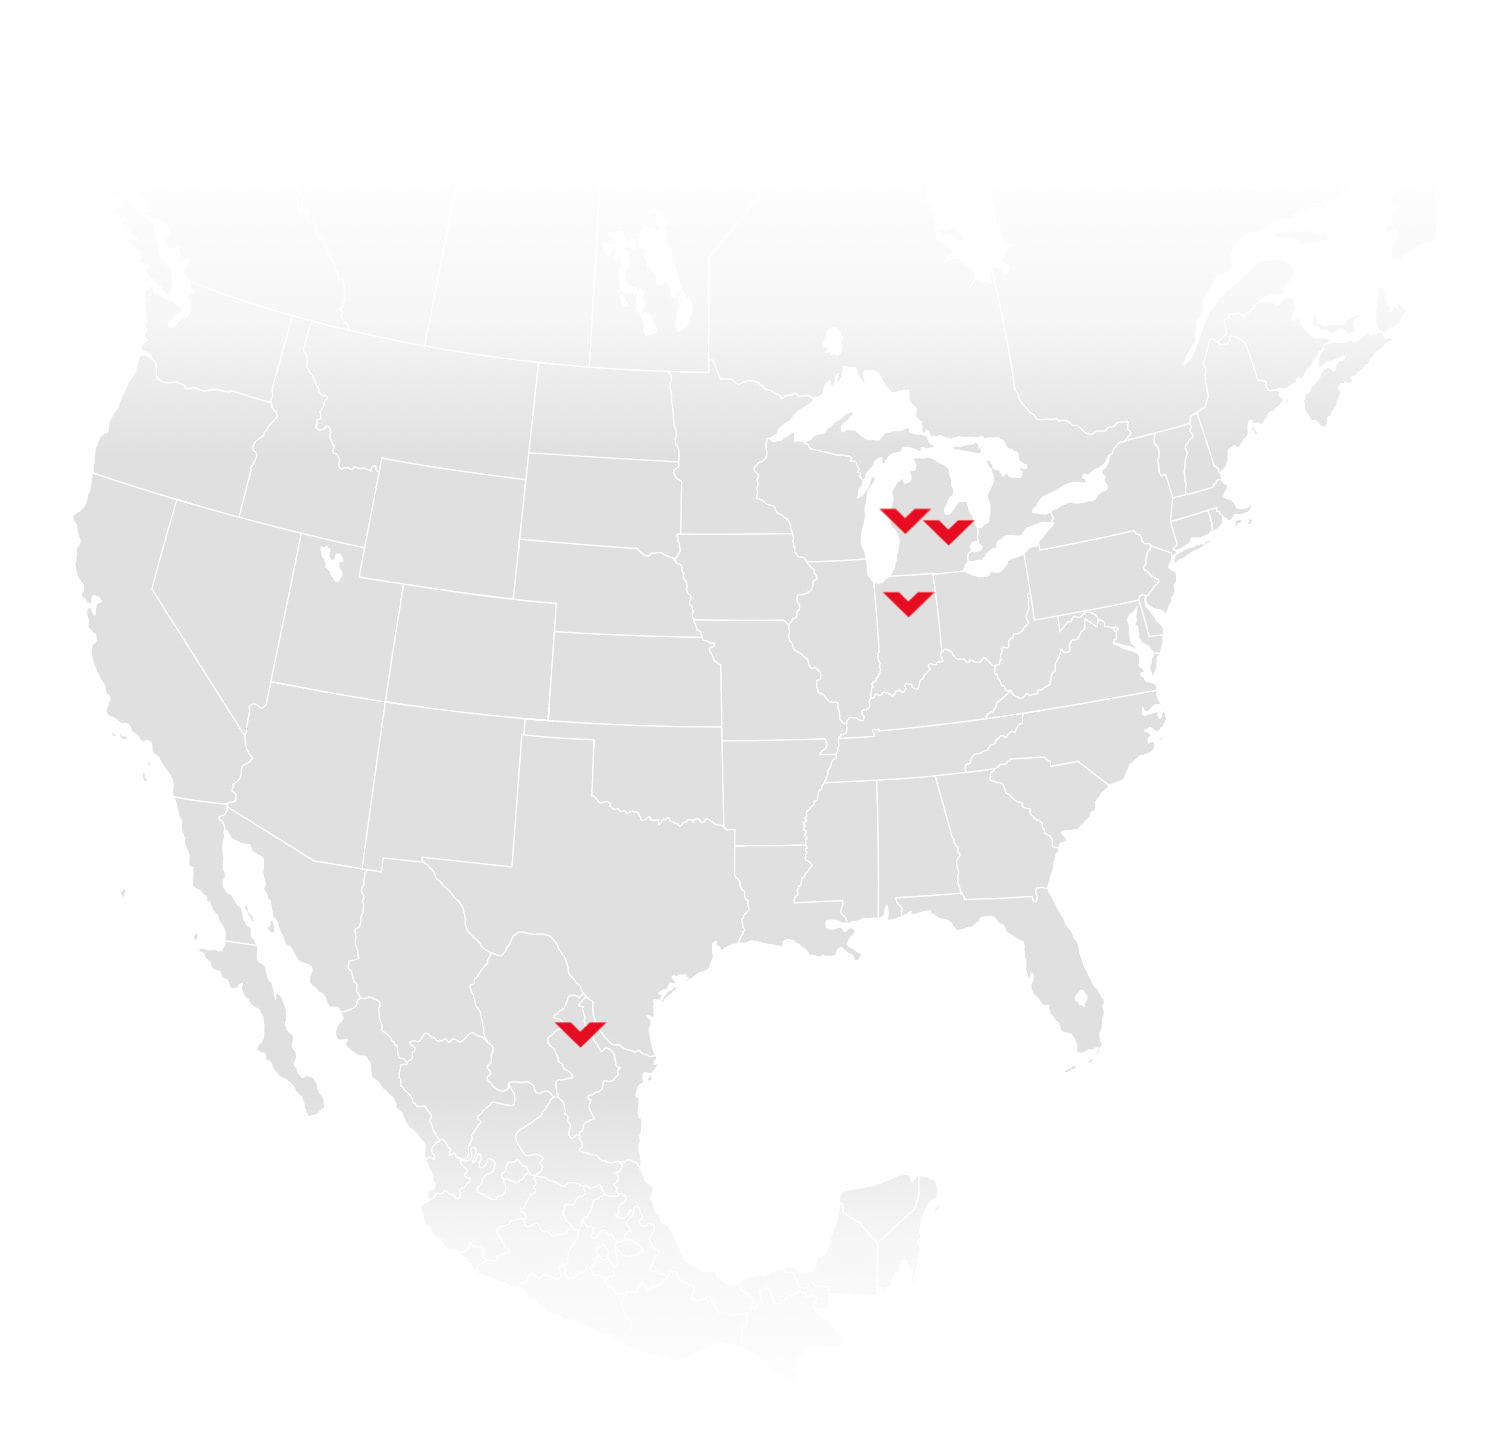 North American map with KC Jones locations marked